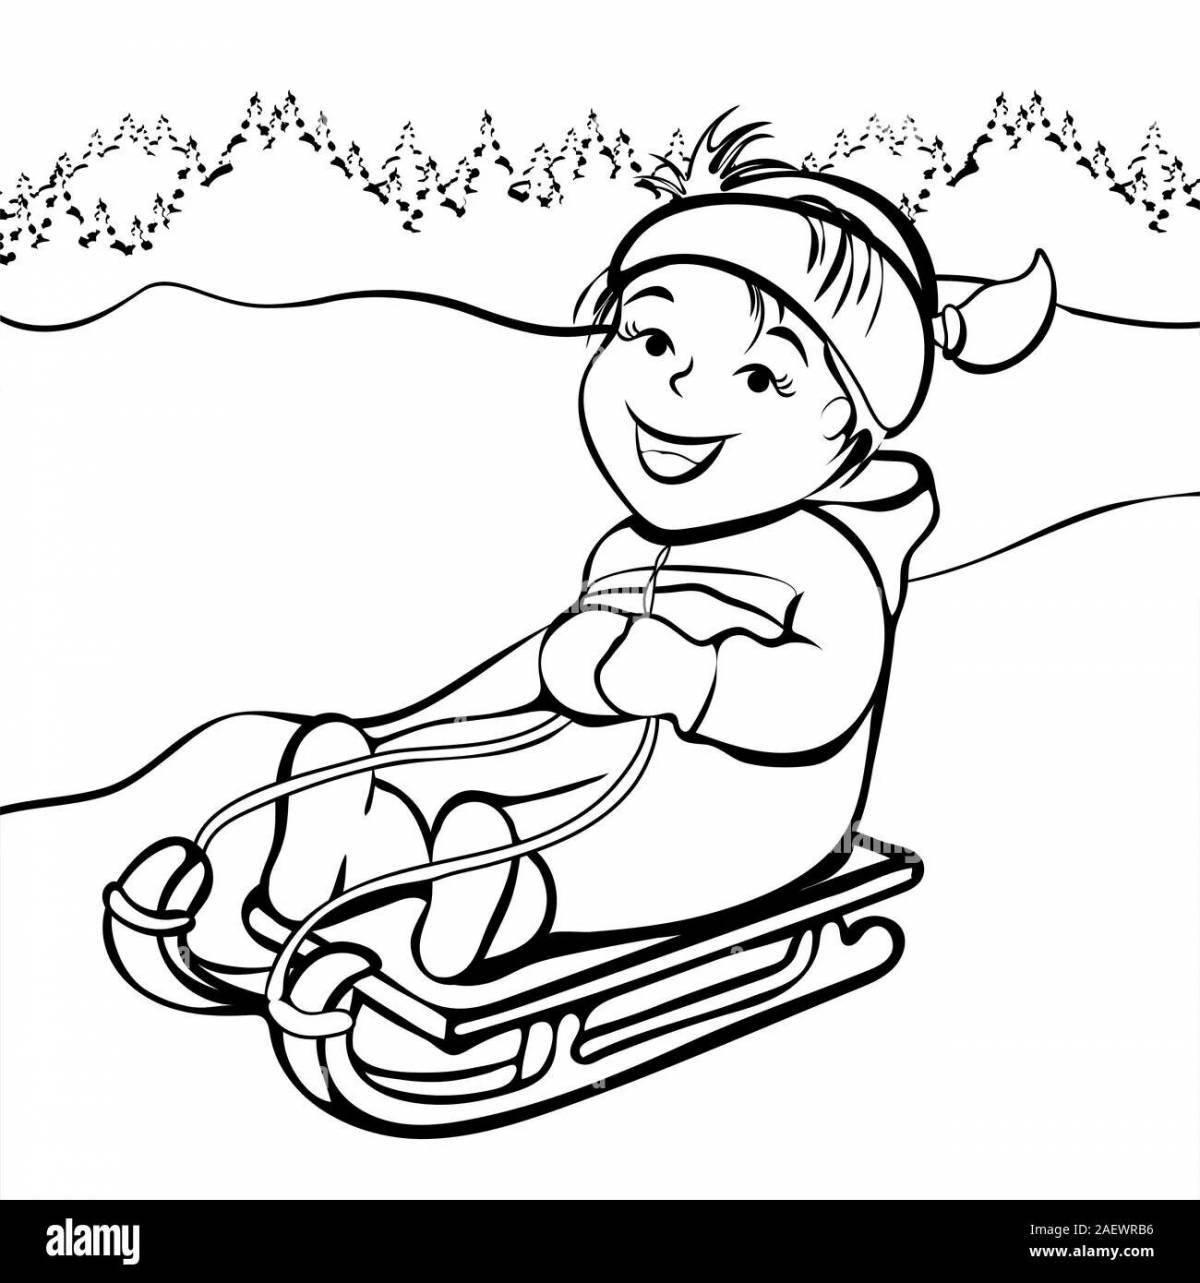 Playful children's coloring on a sled